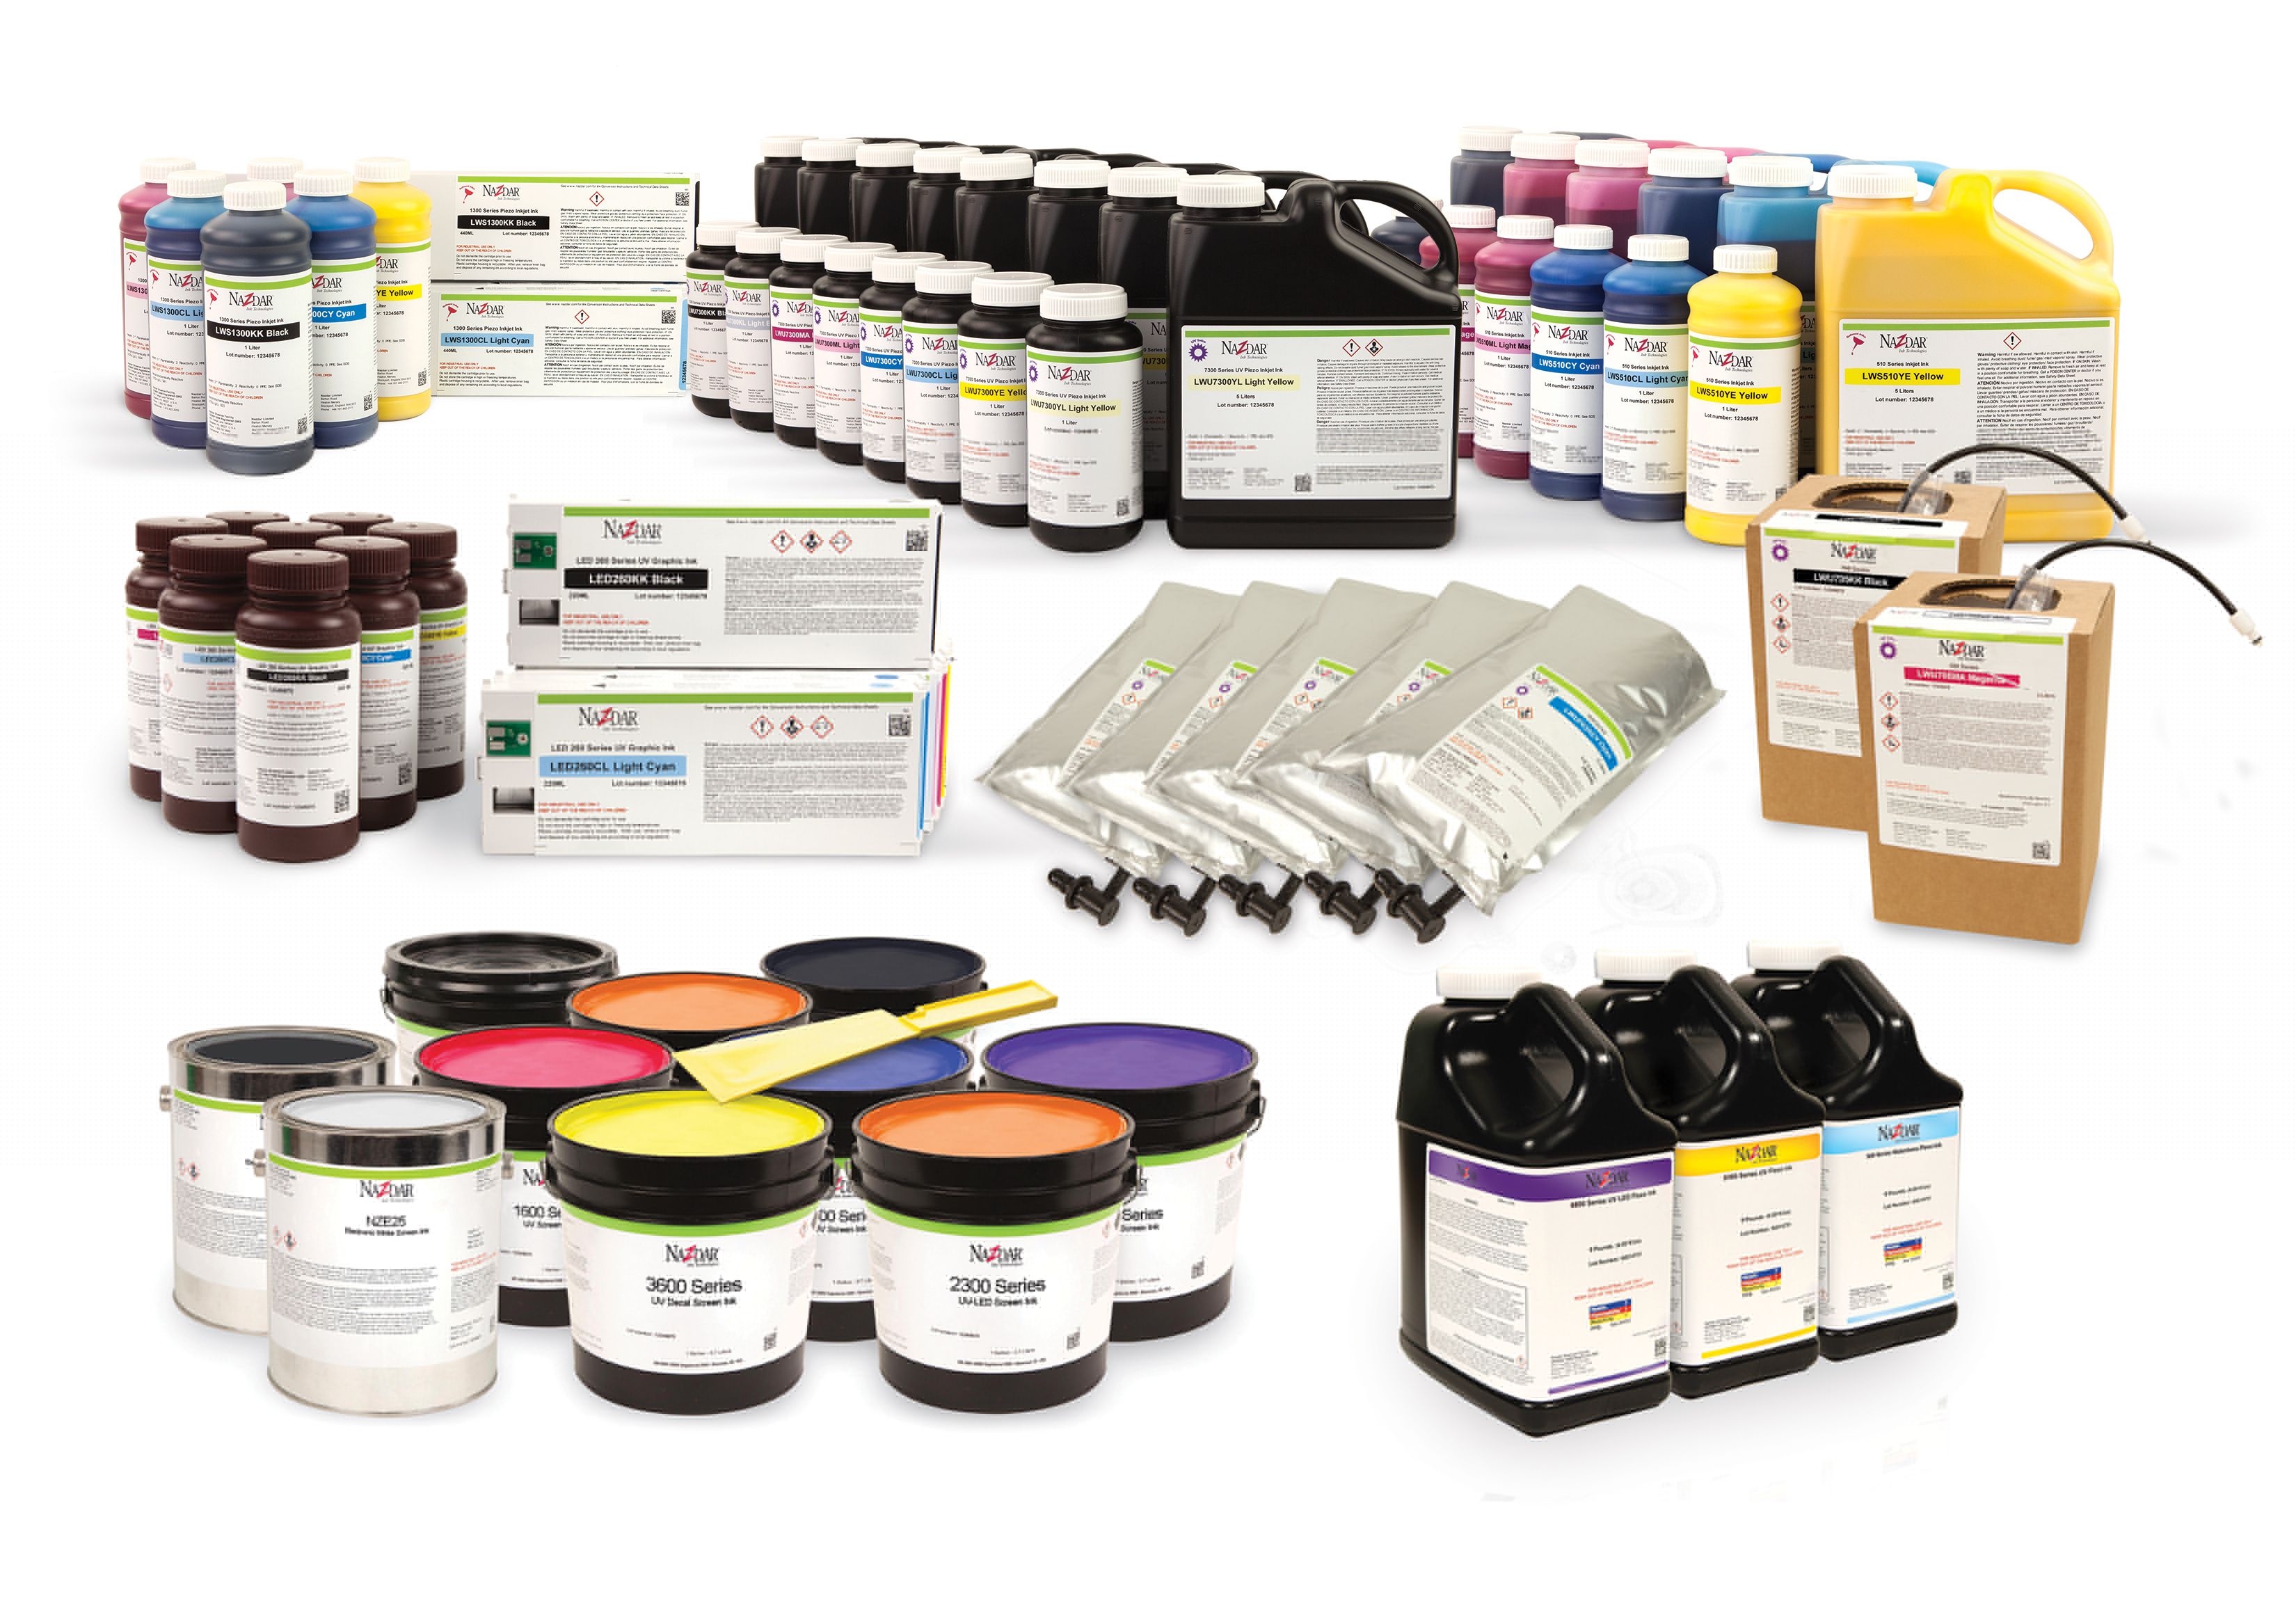 Nazdar Ink Technologies to showcase latest ink innovations at FESPA Global Print Expo 2022